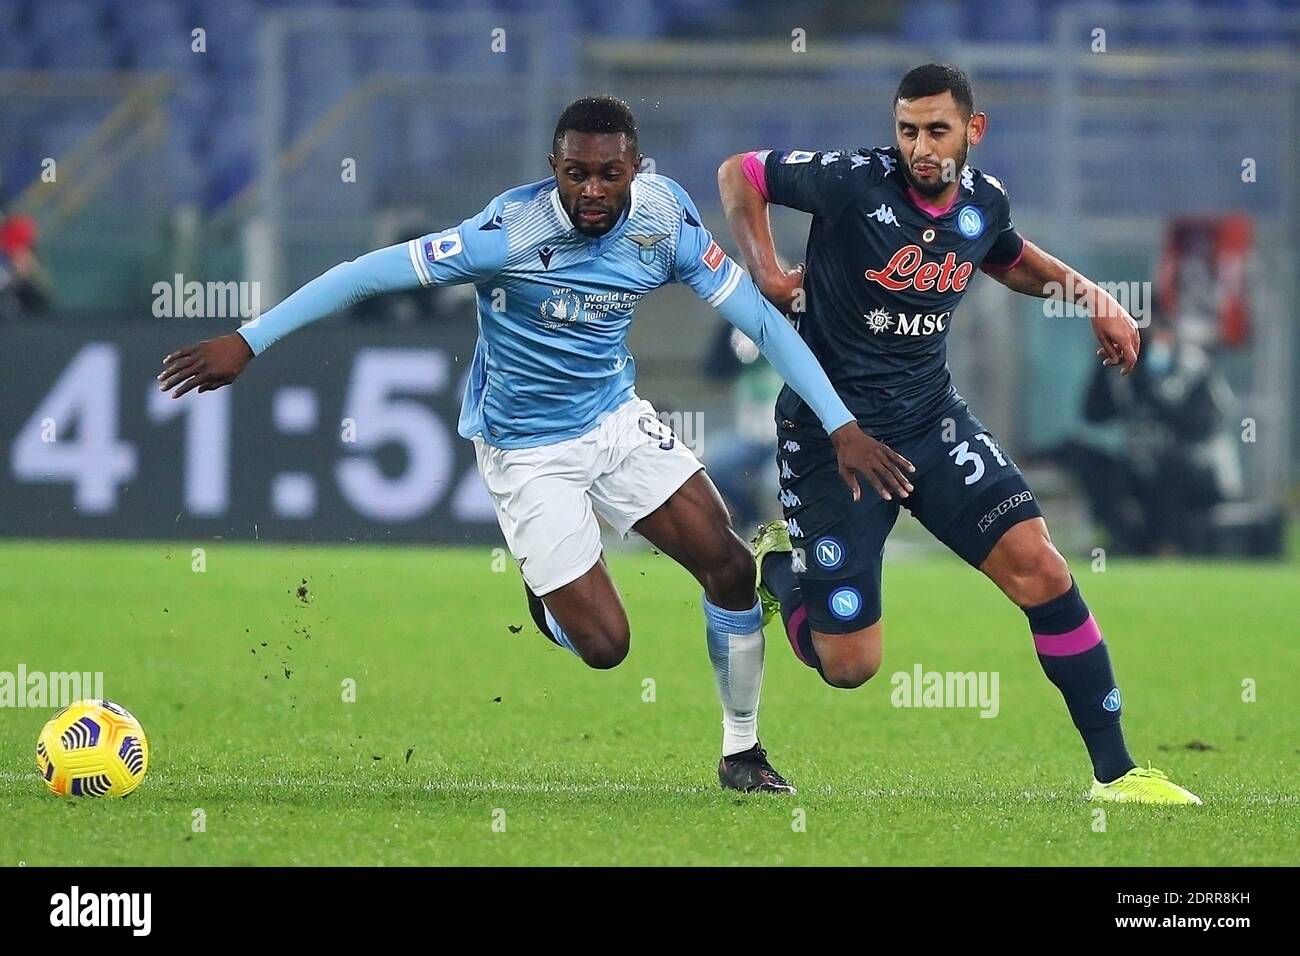 Jean Daniel Akpa Akpro of Lazio (L) vies for the ball with Faouzi Ghoulam of Napoli (R) during the Italian championship Ser / LM Stock Photo